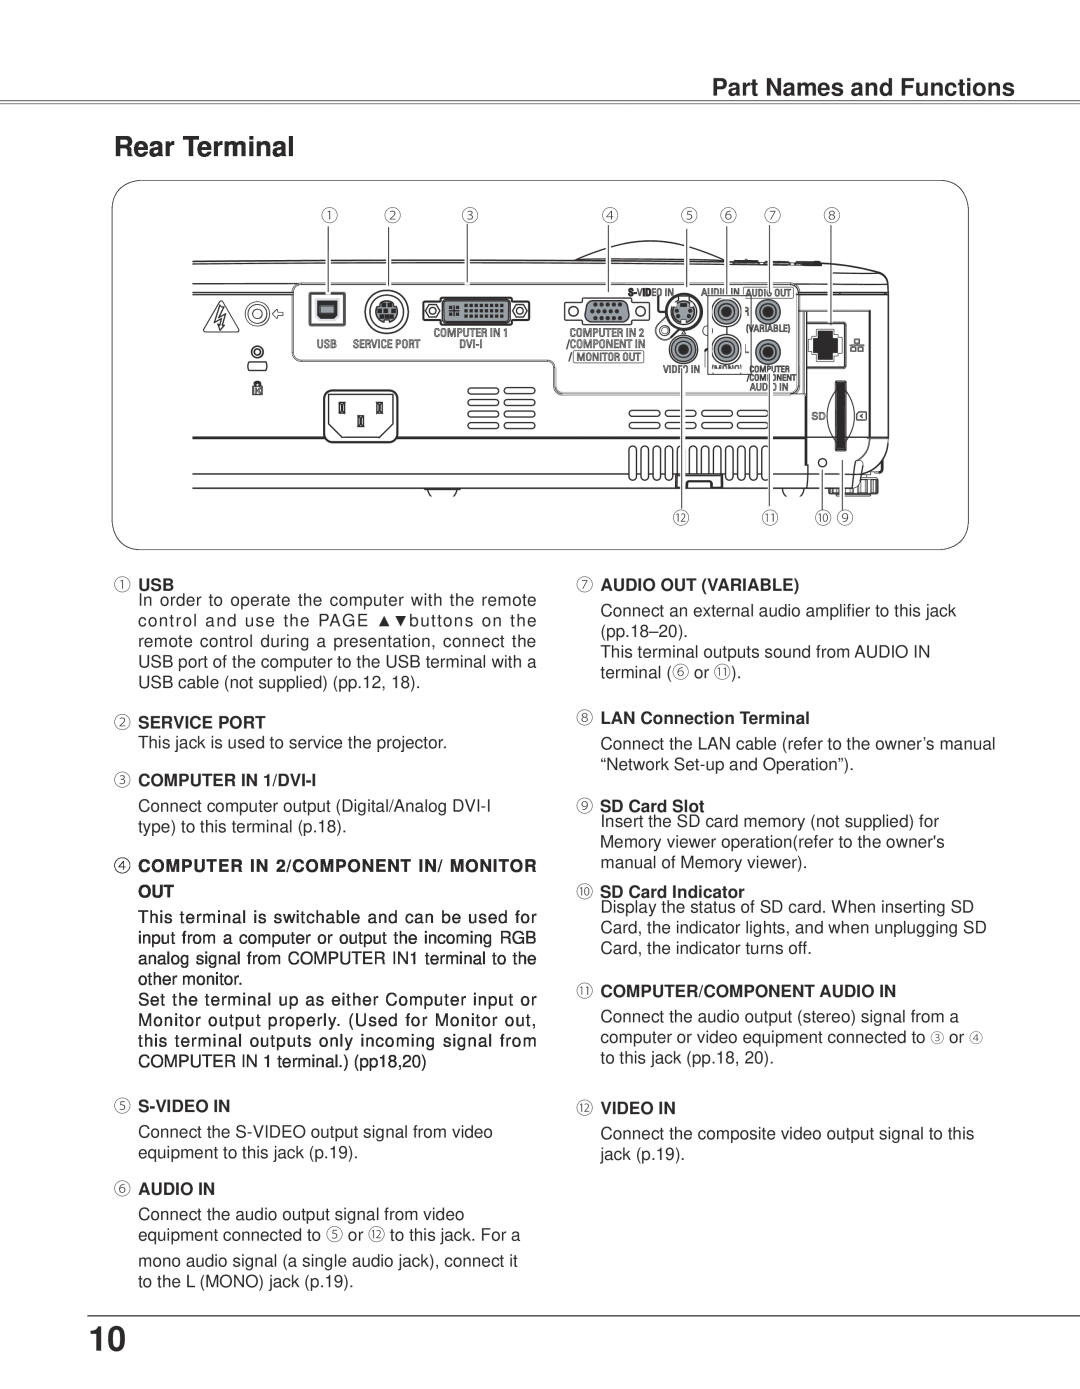 Eiki LC-XB33N owner manual Rear Terminal, Part Names and Functions 